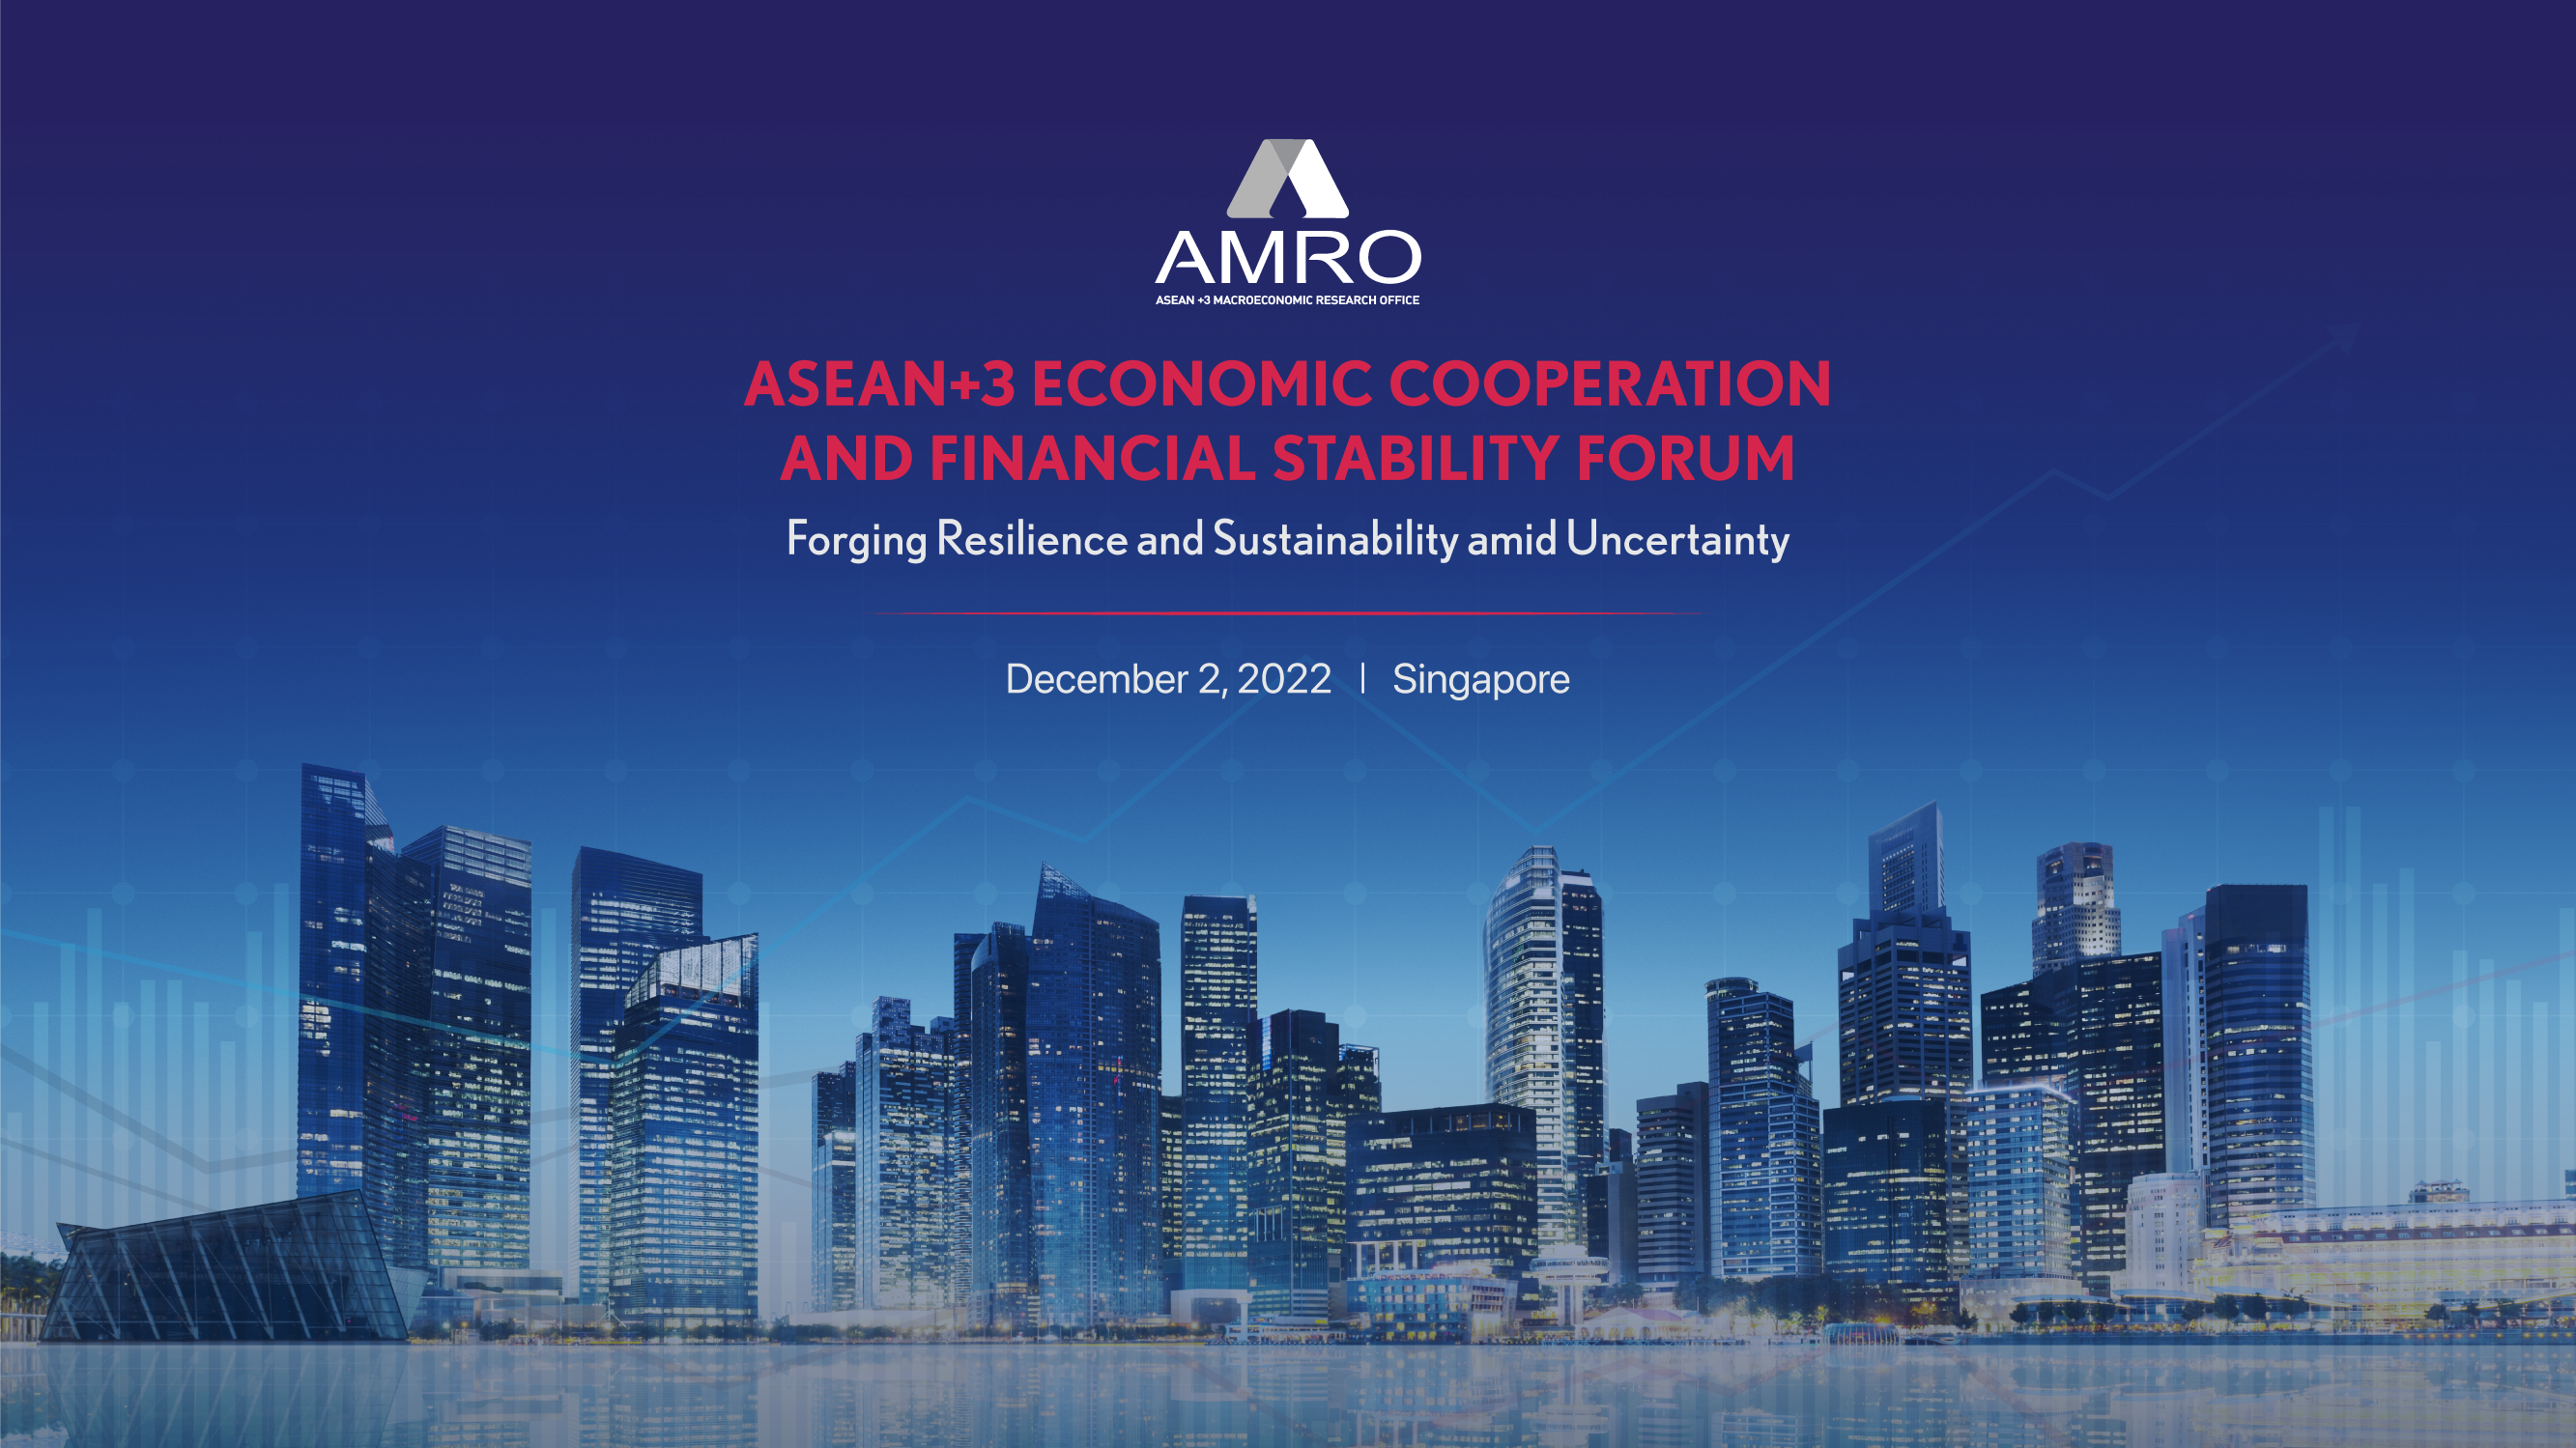 ASEAN+3 Economic Cooperation and Financial Stability Forum